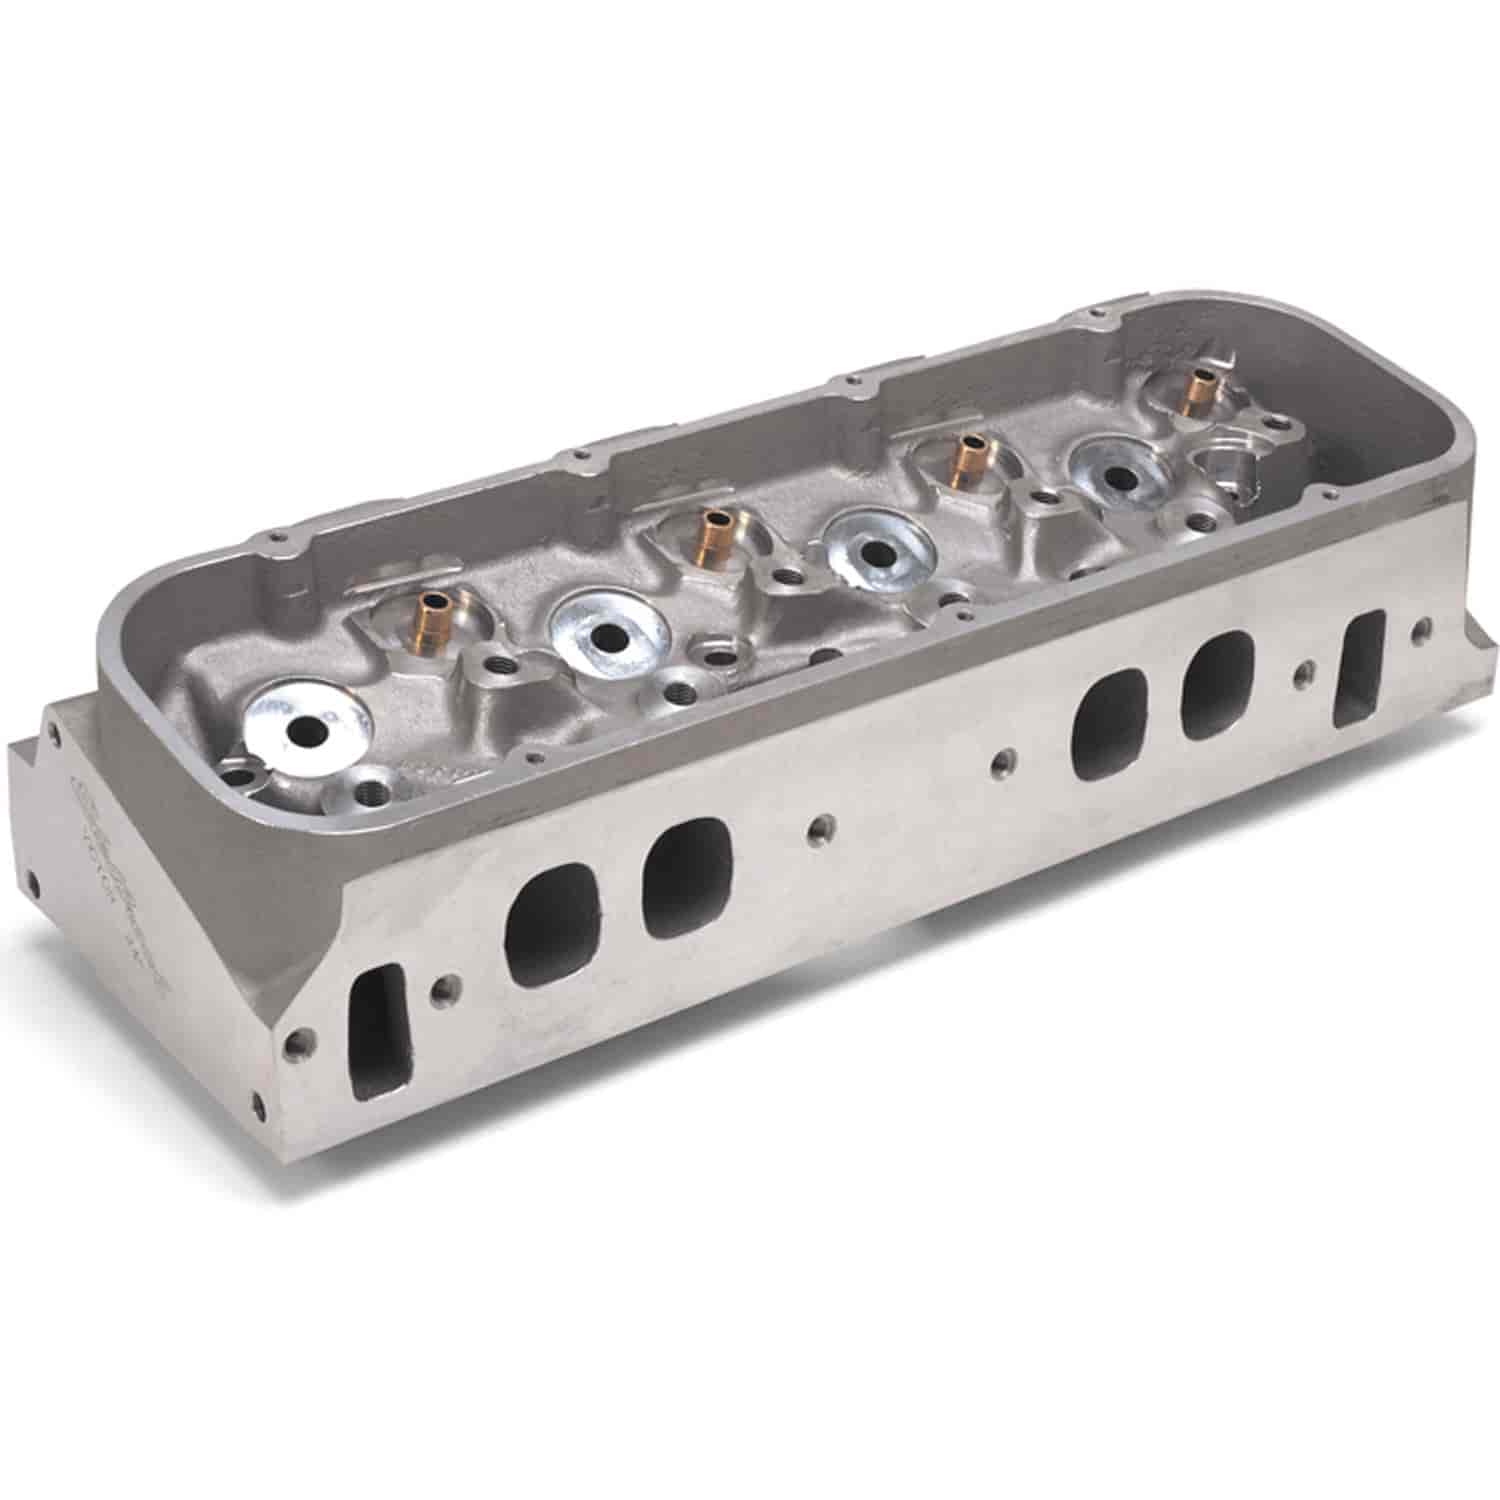 Pro-Port Raw Victor 24 Degree Cylinder Head for Big Block Chevy